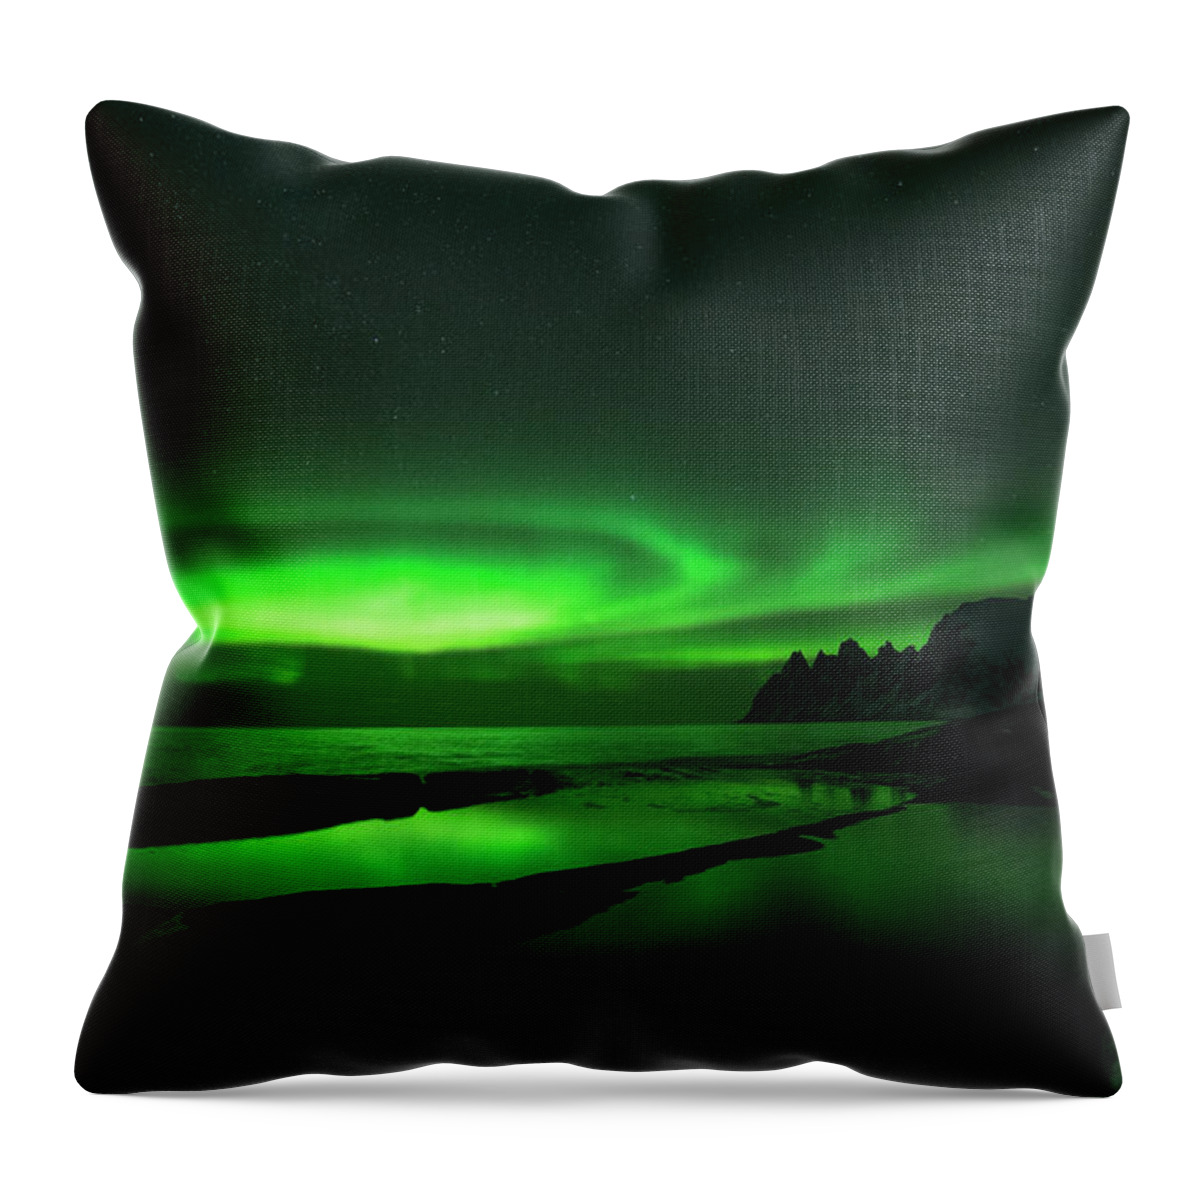 Whirlpool Throw Pillow featuring the photograph Whirlpool by Alex Lapidus